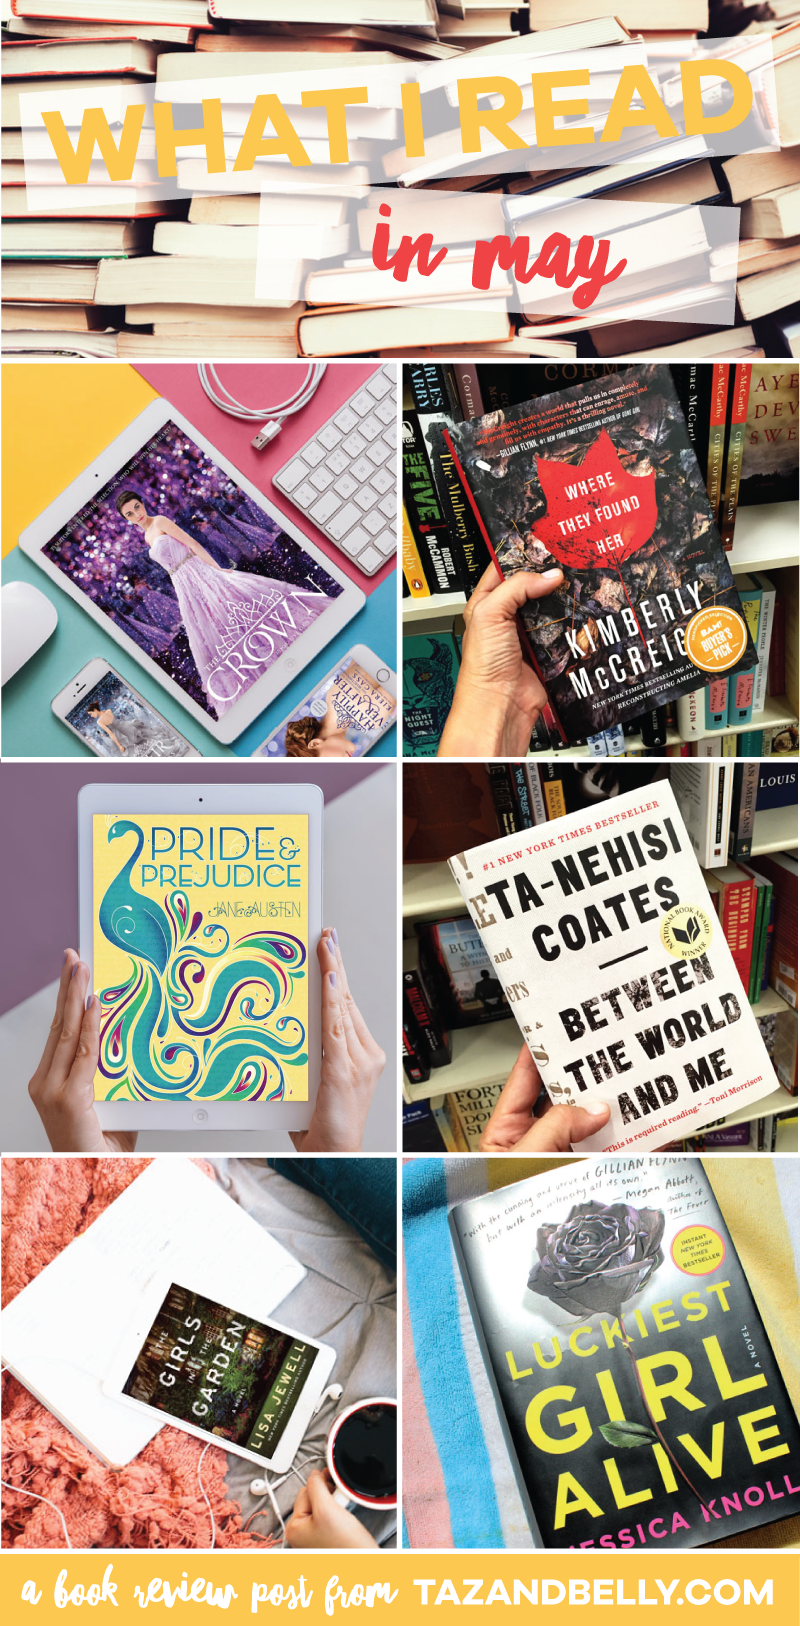 Do you need summer reading recommendations? Here's What I Read in May: Where They Found Her, The Crown, Between the World & Me, Price & Prejudice & More! | tazandbelly.com